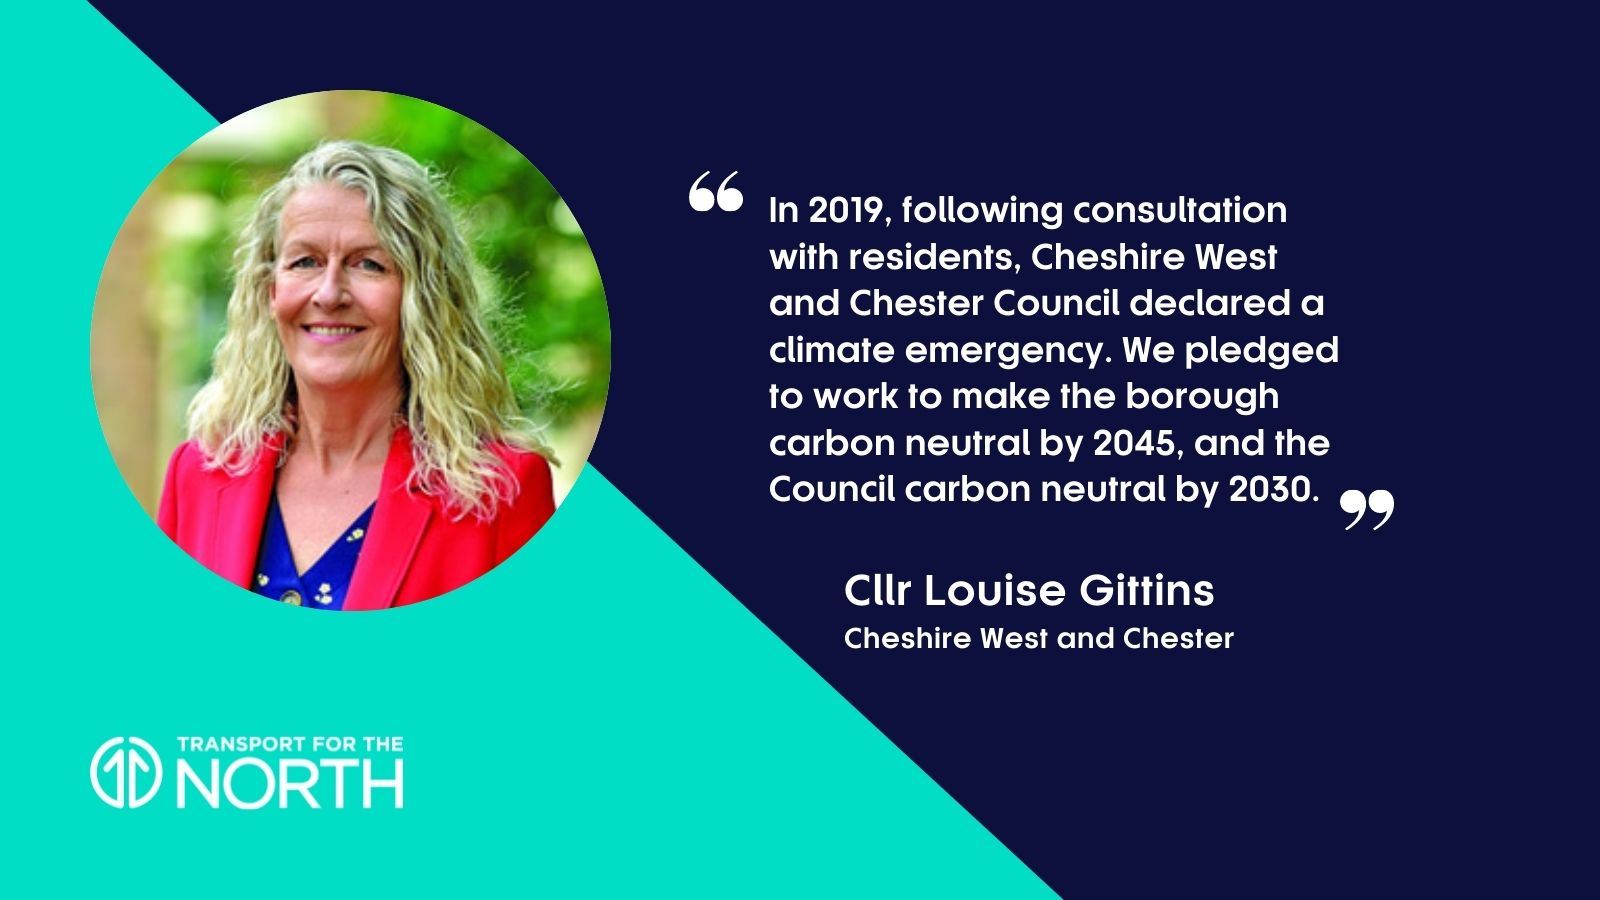 Cllr Louise Gittins on the Transport for the North Decarbonisation Strategy